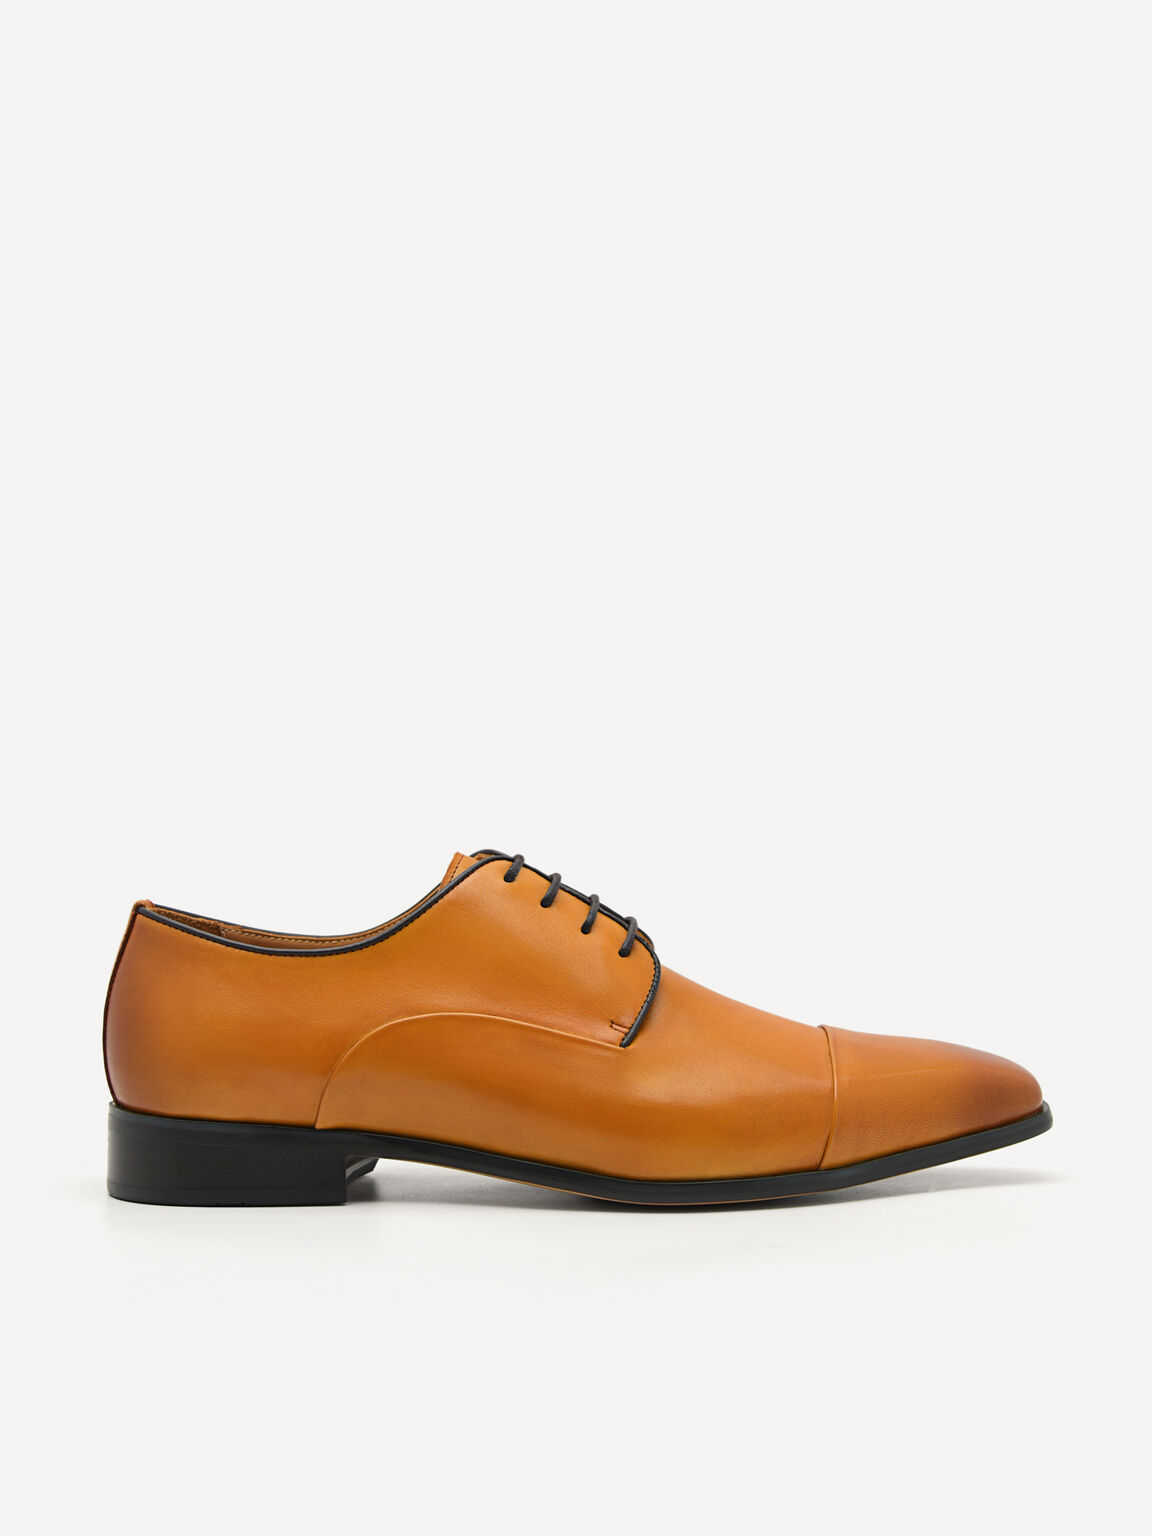 Brando Leather Derby Shoes, Camel